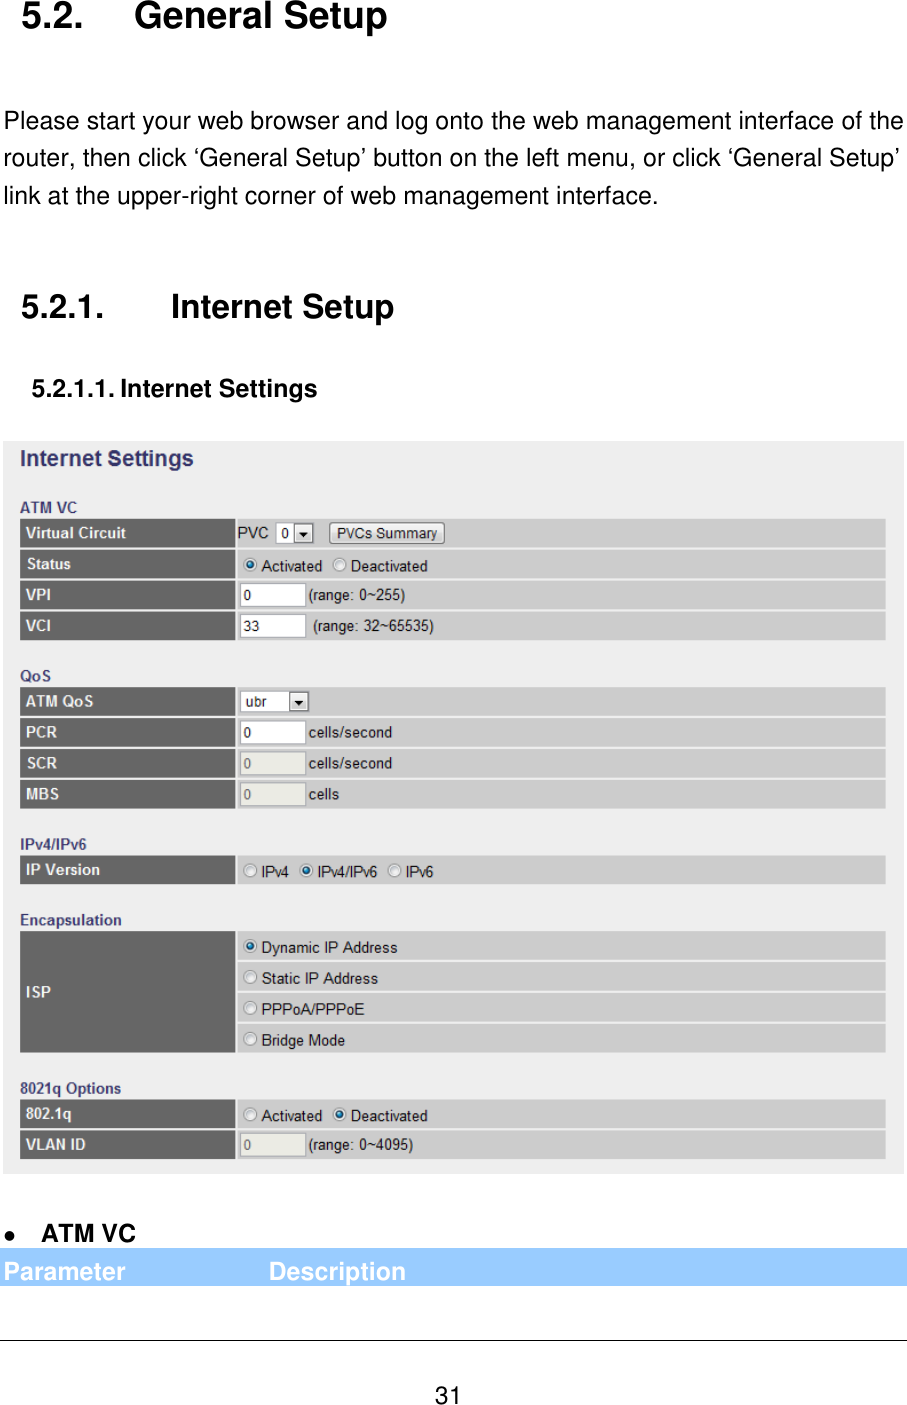   31 5.2.  General Setup  Please start your web browser and log onto the web management interface of the router, then click ‘General Setup’ button on the left menu, or click ‘General Setup’ link at the upper-right corner of web management interface.   5.2.1.  Internet Setup  5.2.1.1. Internet Settings     ATM VC Parameter Description 